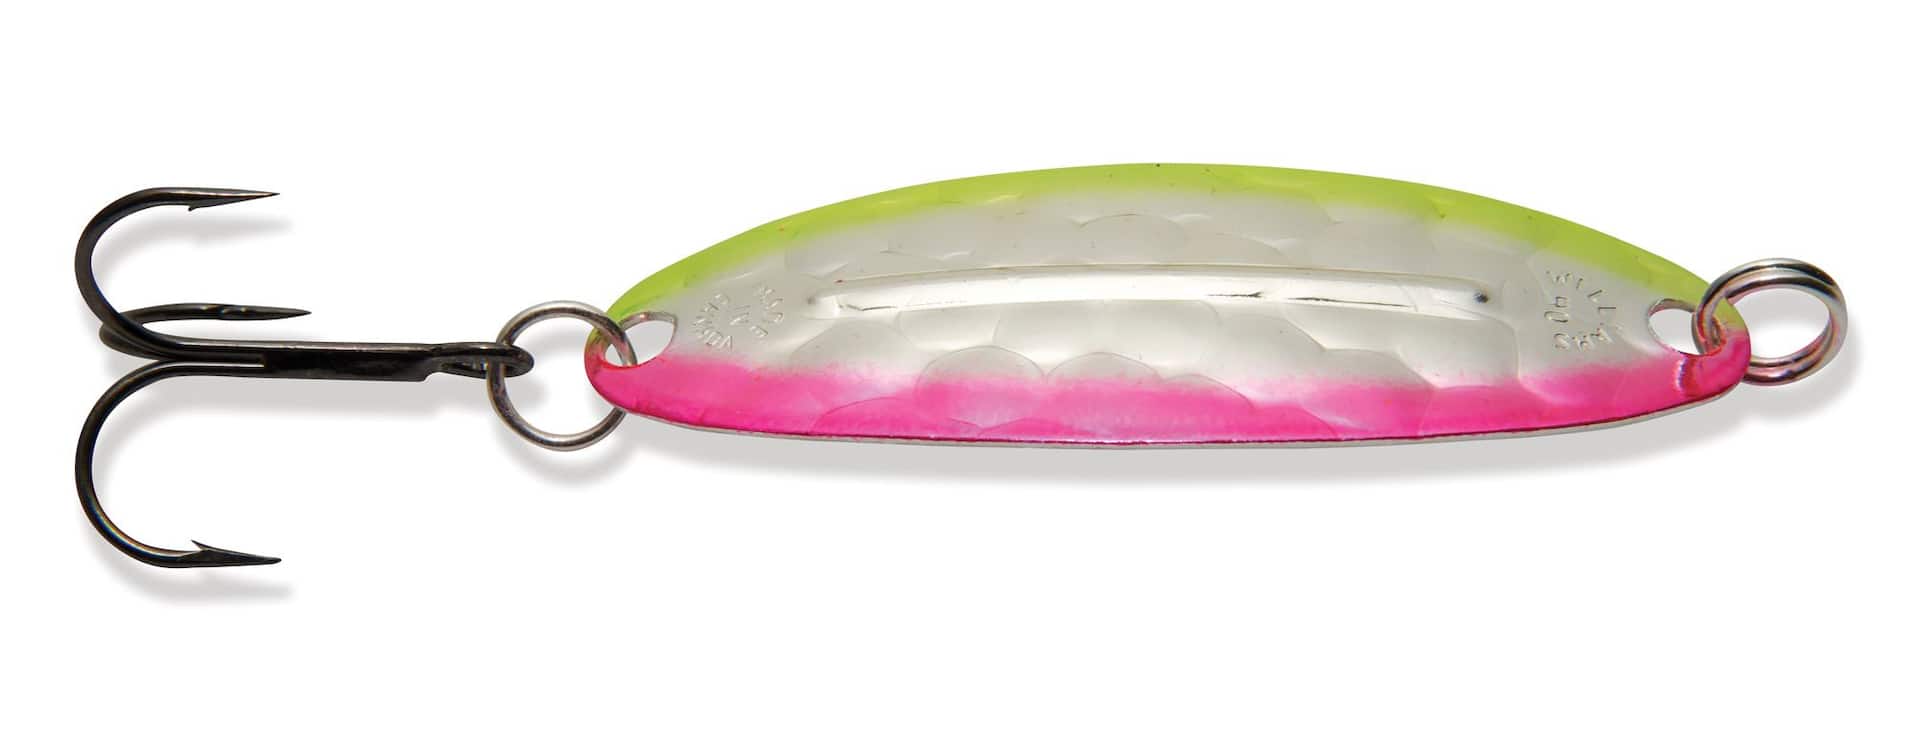 https://media-www.canadiantire.ca/product/playing/fishing/fishing-lures/0776903/williams-wabler-w40-watermelon-974a82b6-a0eb-48db-a8d8-68e1489f22b6-jpgrendition.jpg